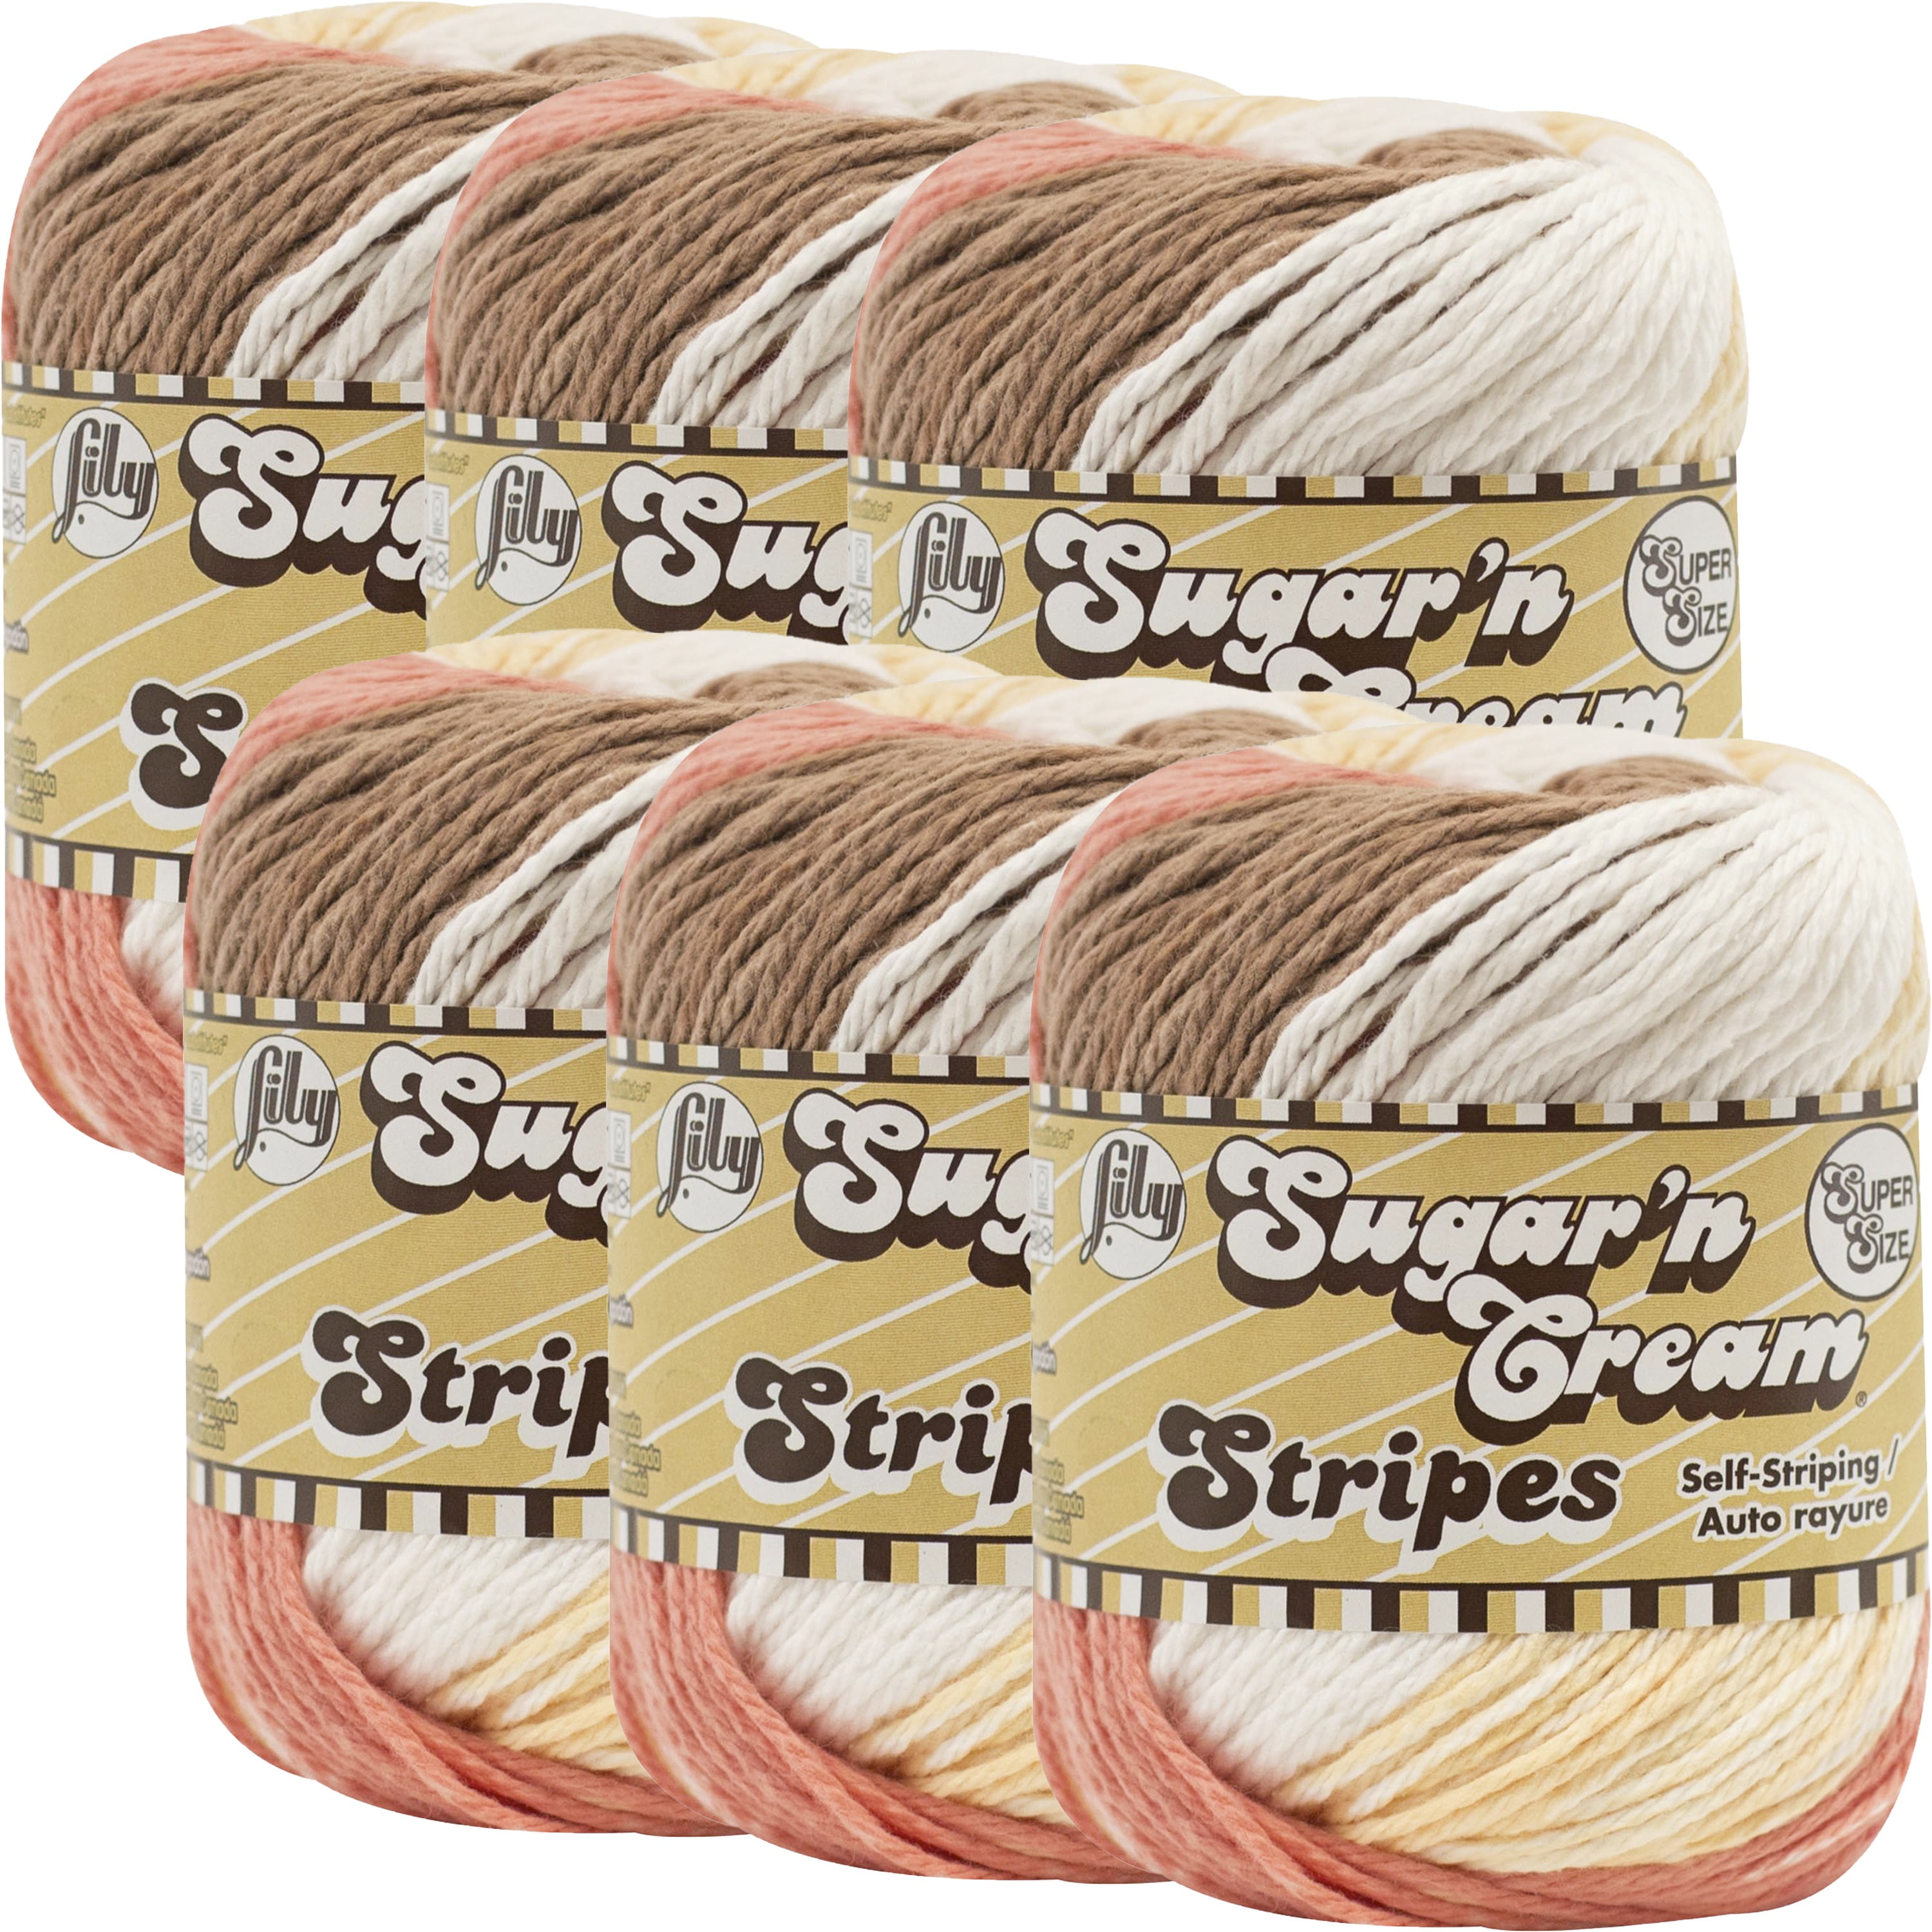 Lily Sugar n' Cream 6 Pack Bundle Country Stripes and 5 Lily Patterns